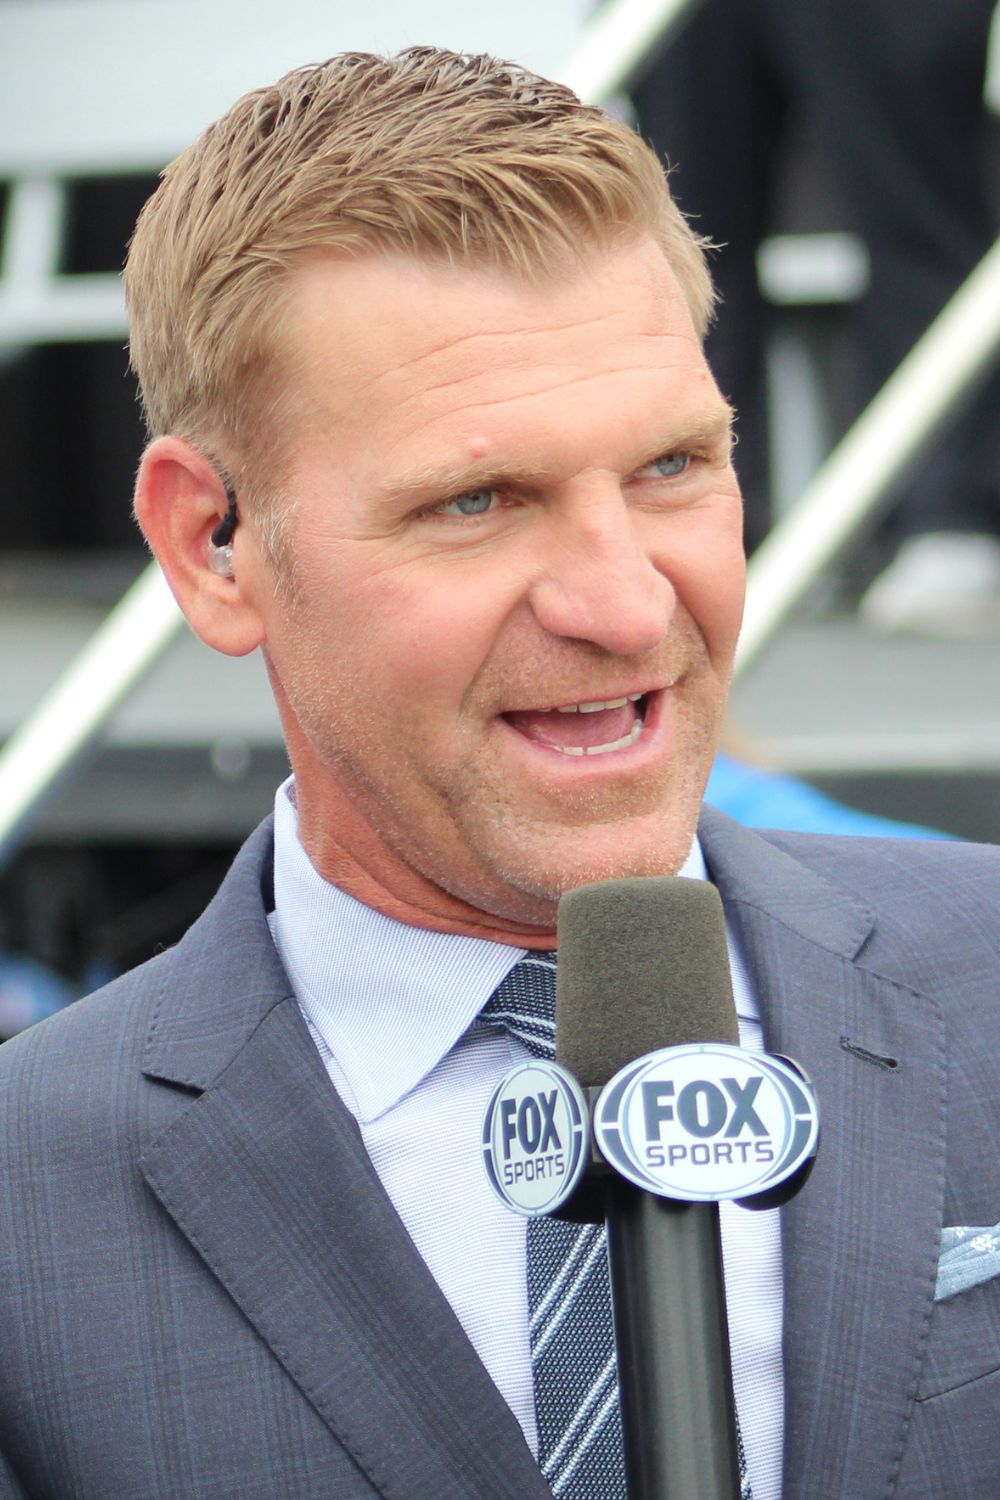 Former Racing Driver Clint Bowyer